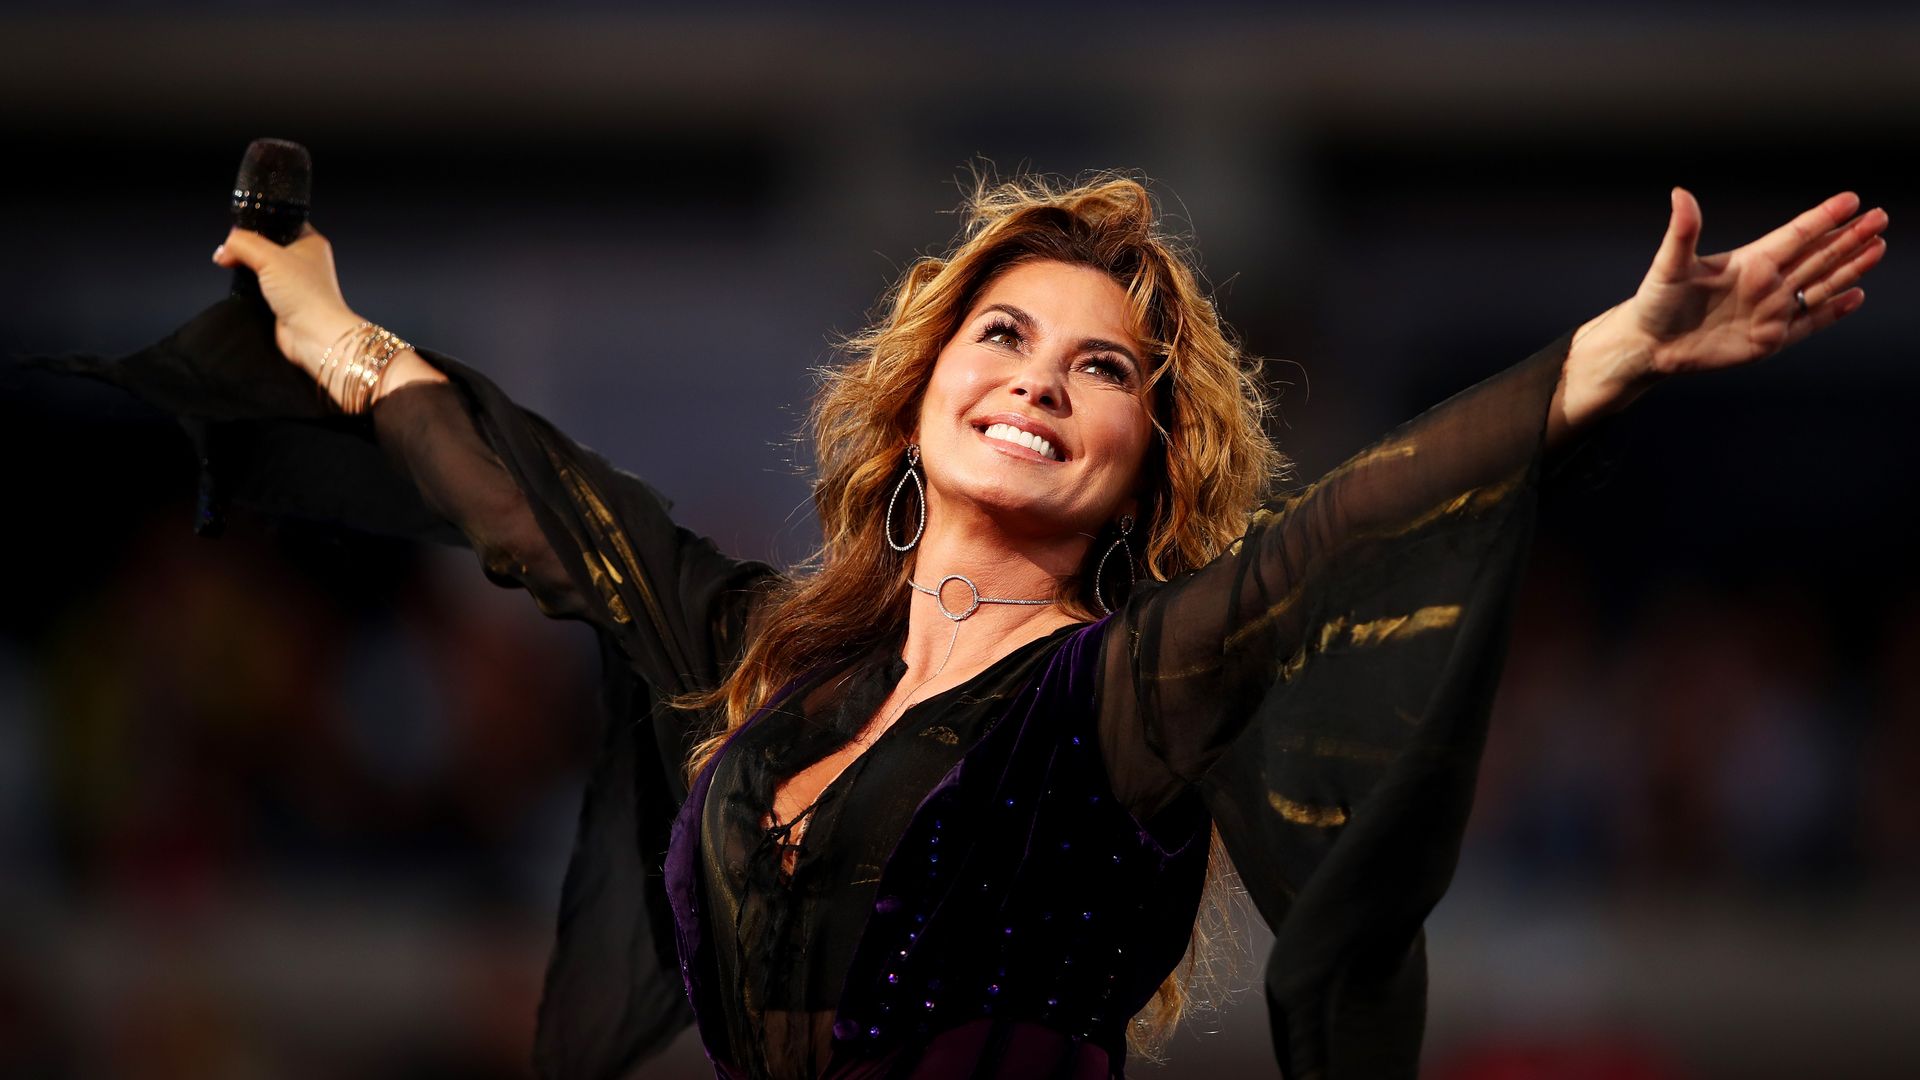 Shania Twain's divisive beauty regime uses two ingredients you'll find in your kitchen — but this expert is advising against it